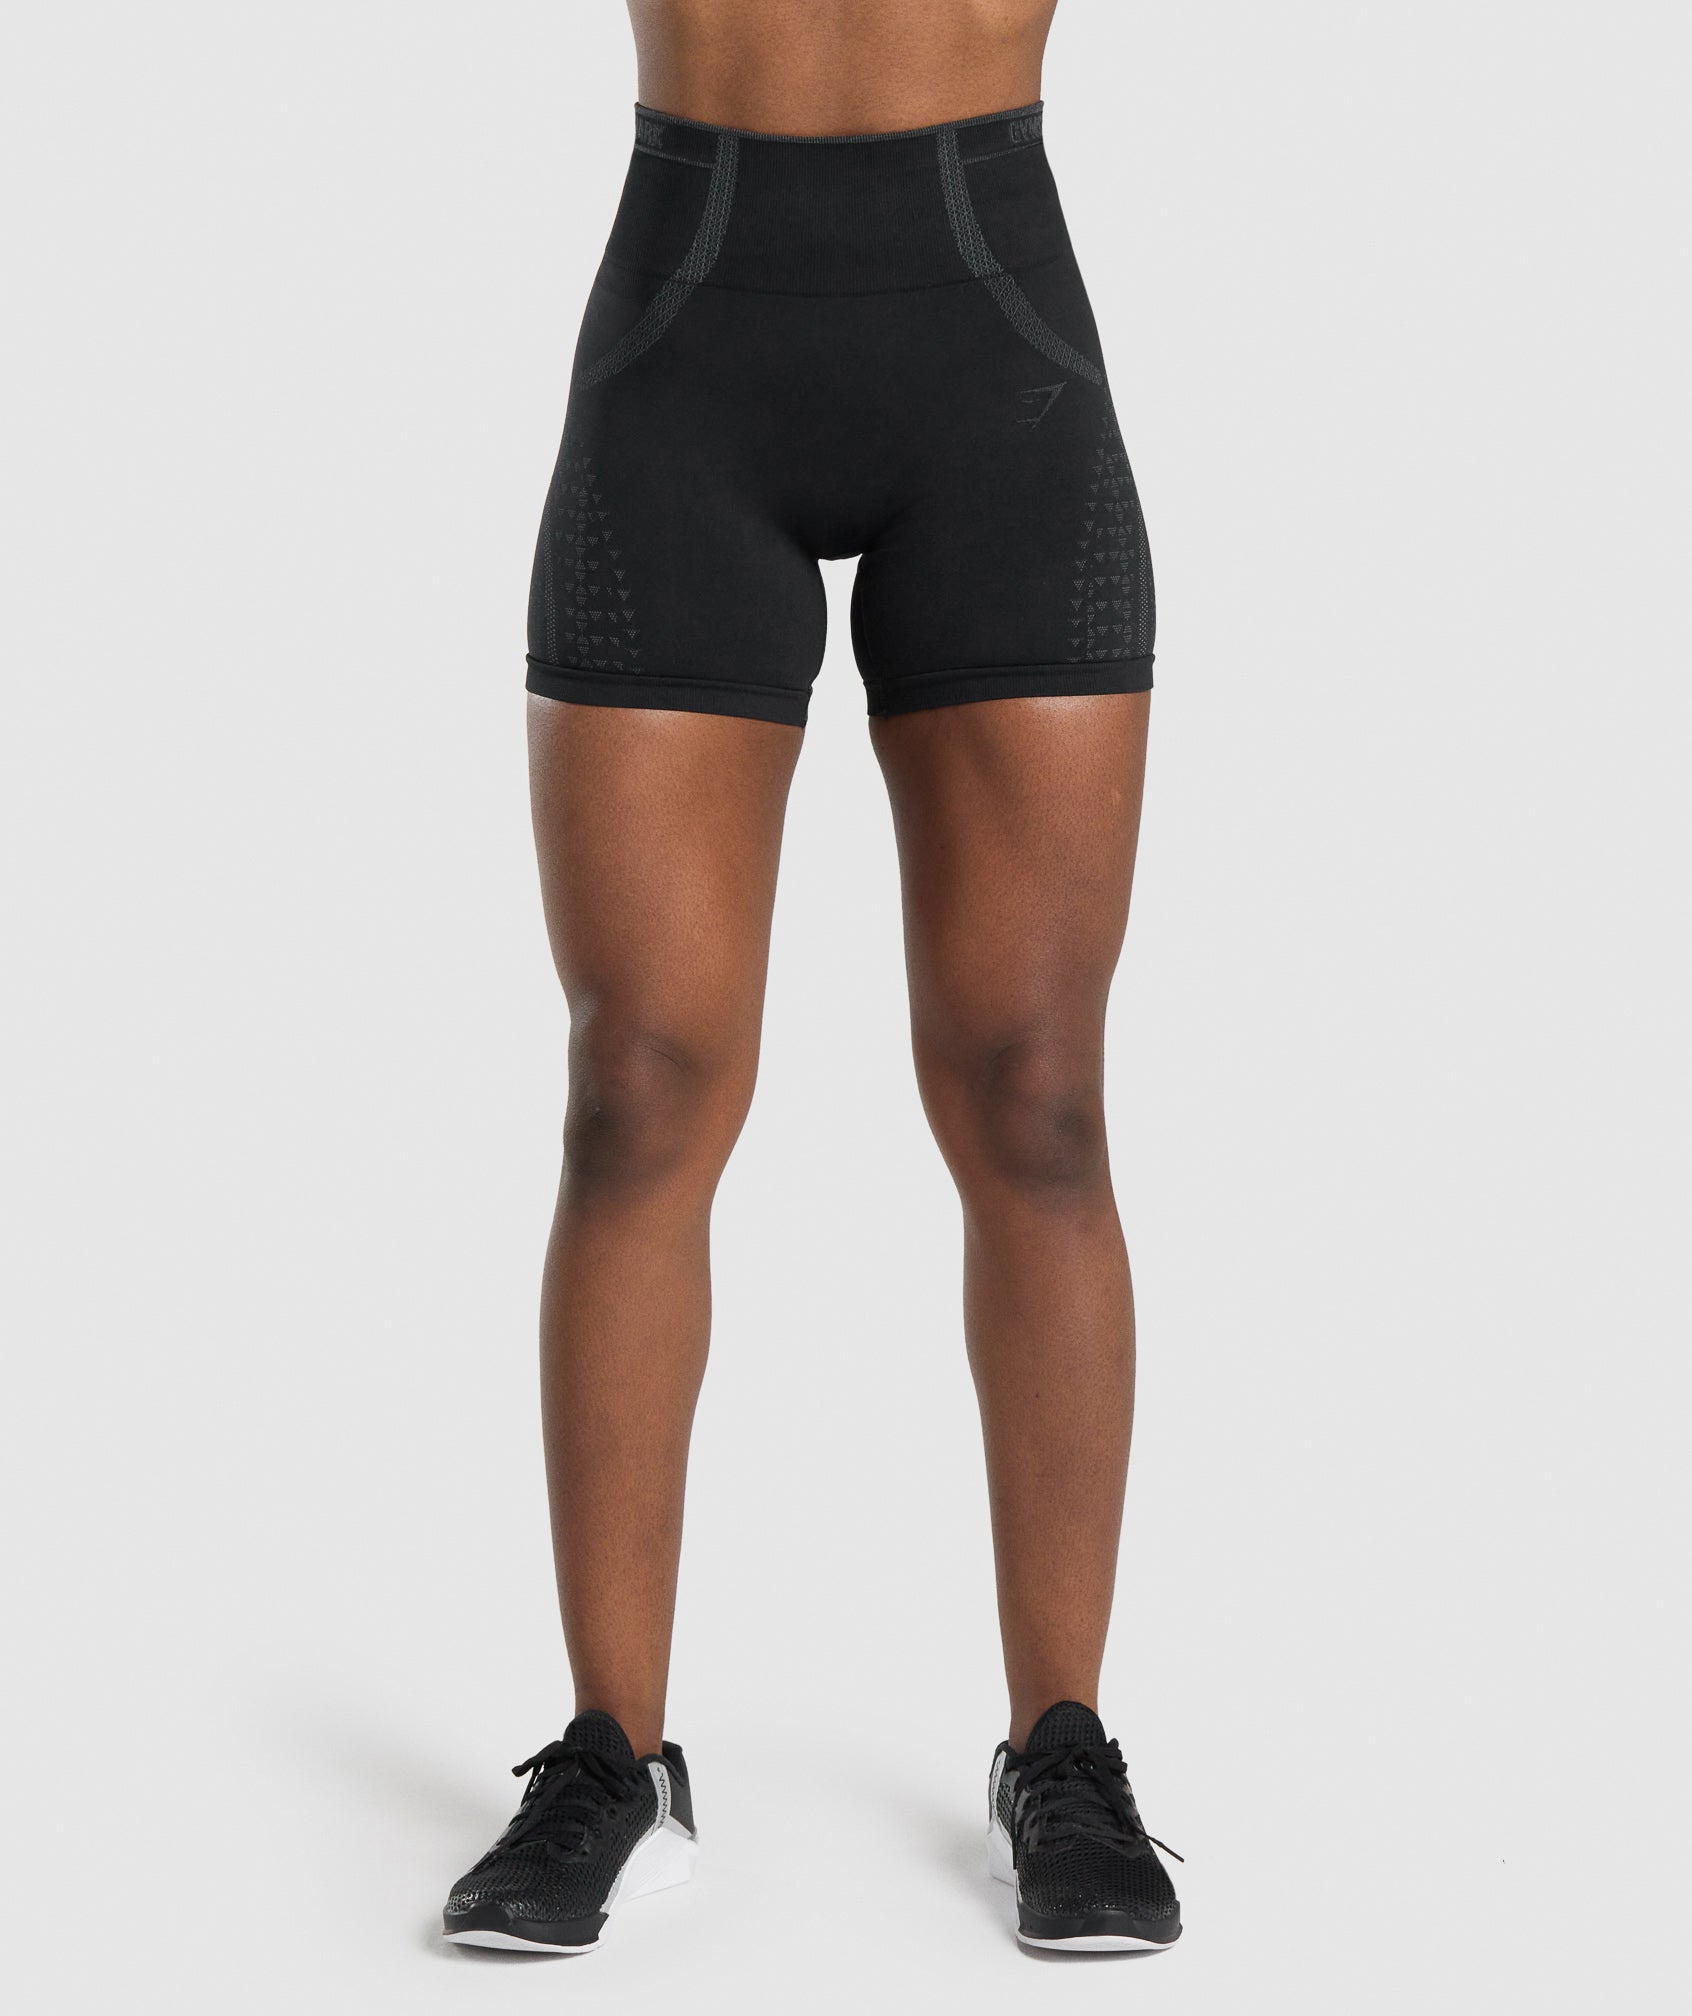 Apex Seamless Shorts in Black/Grey - view 1